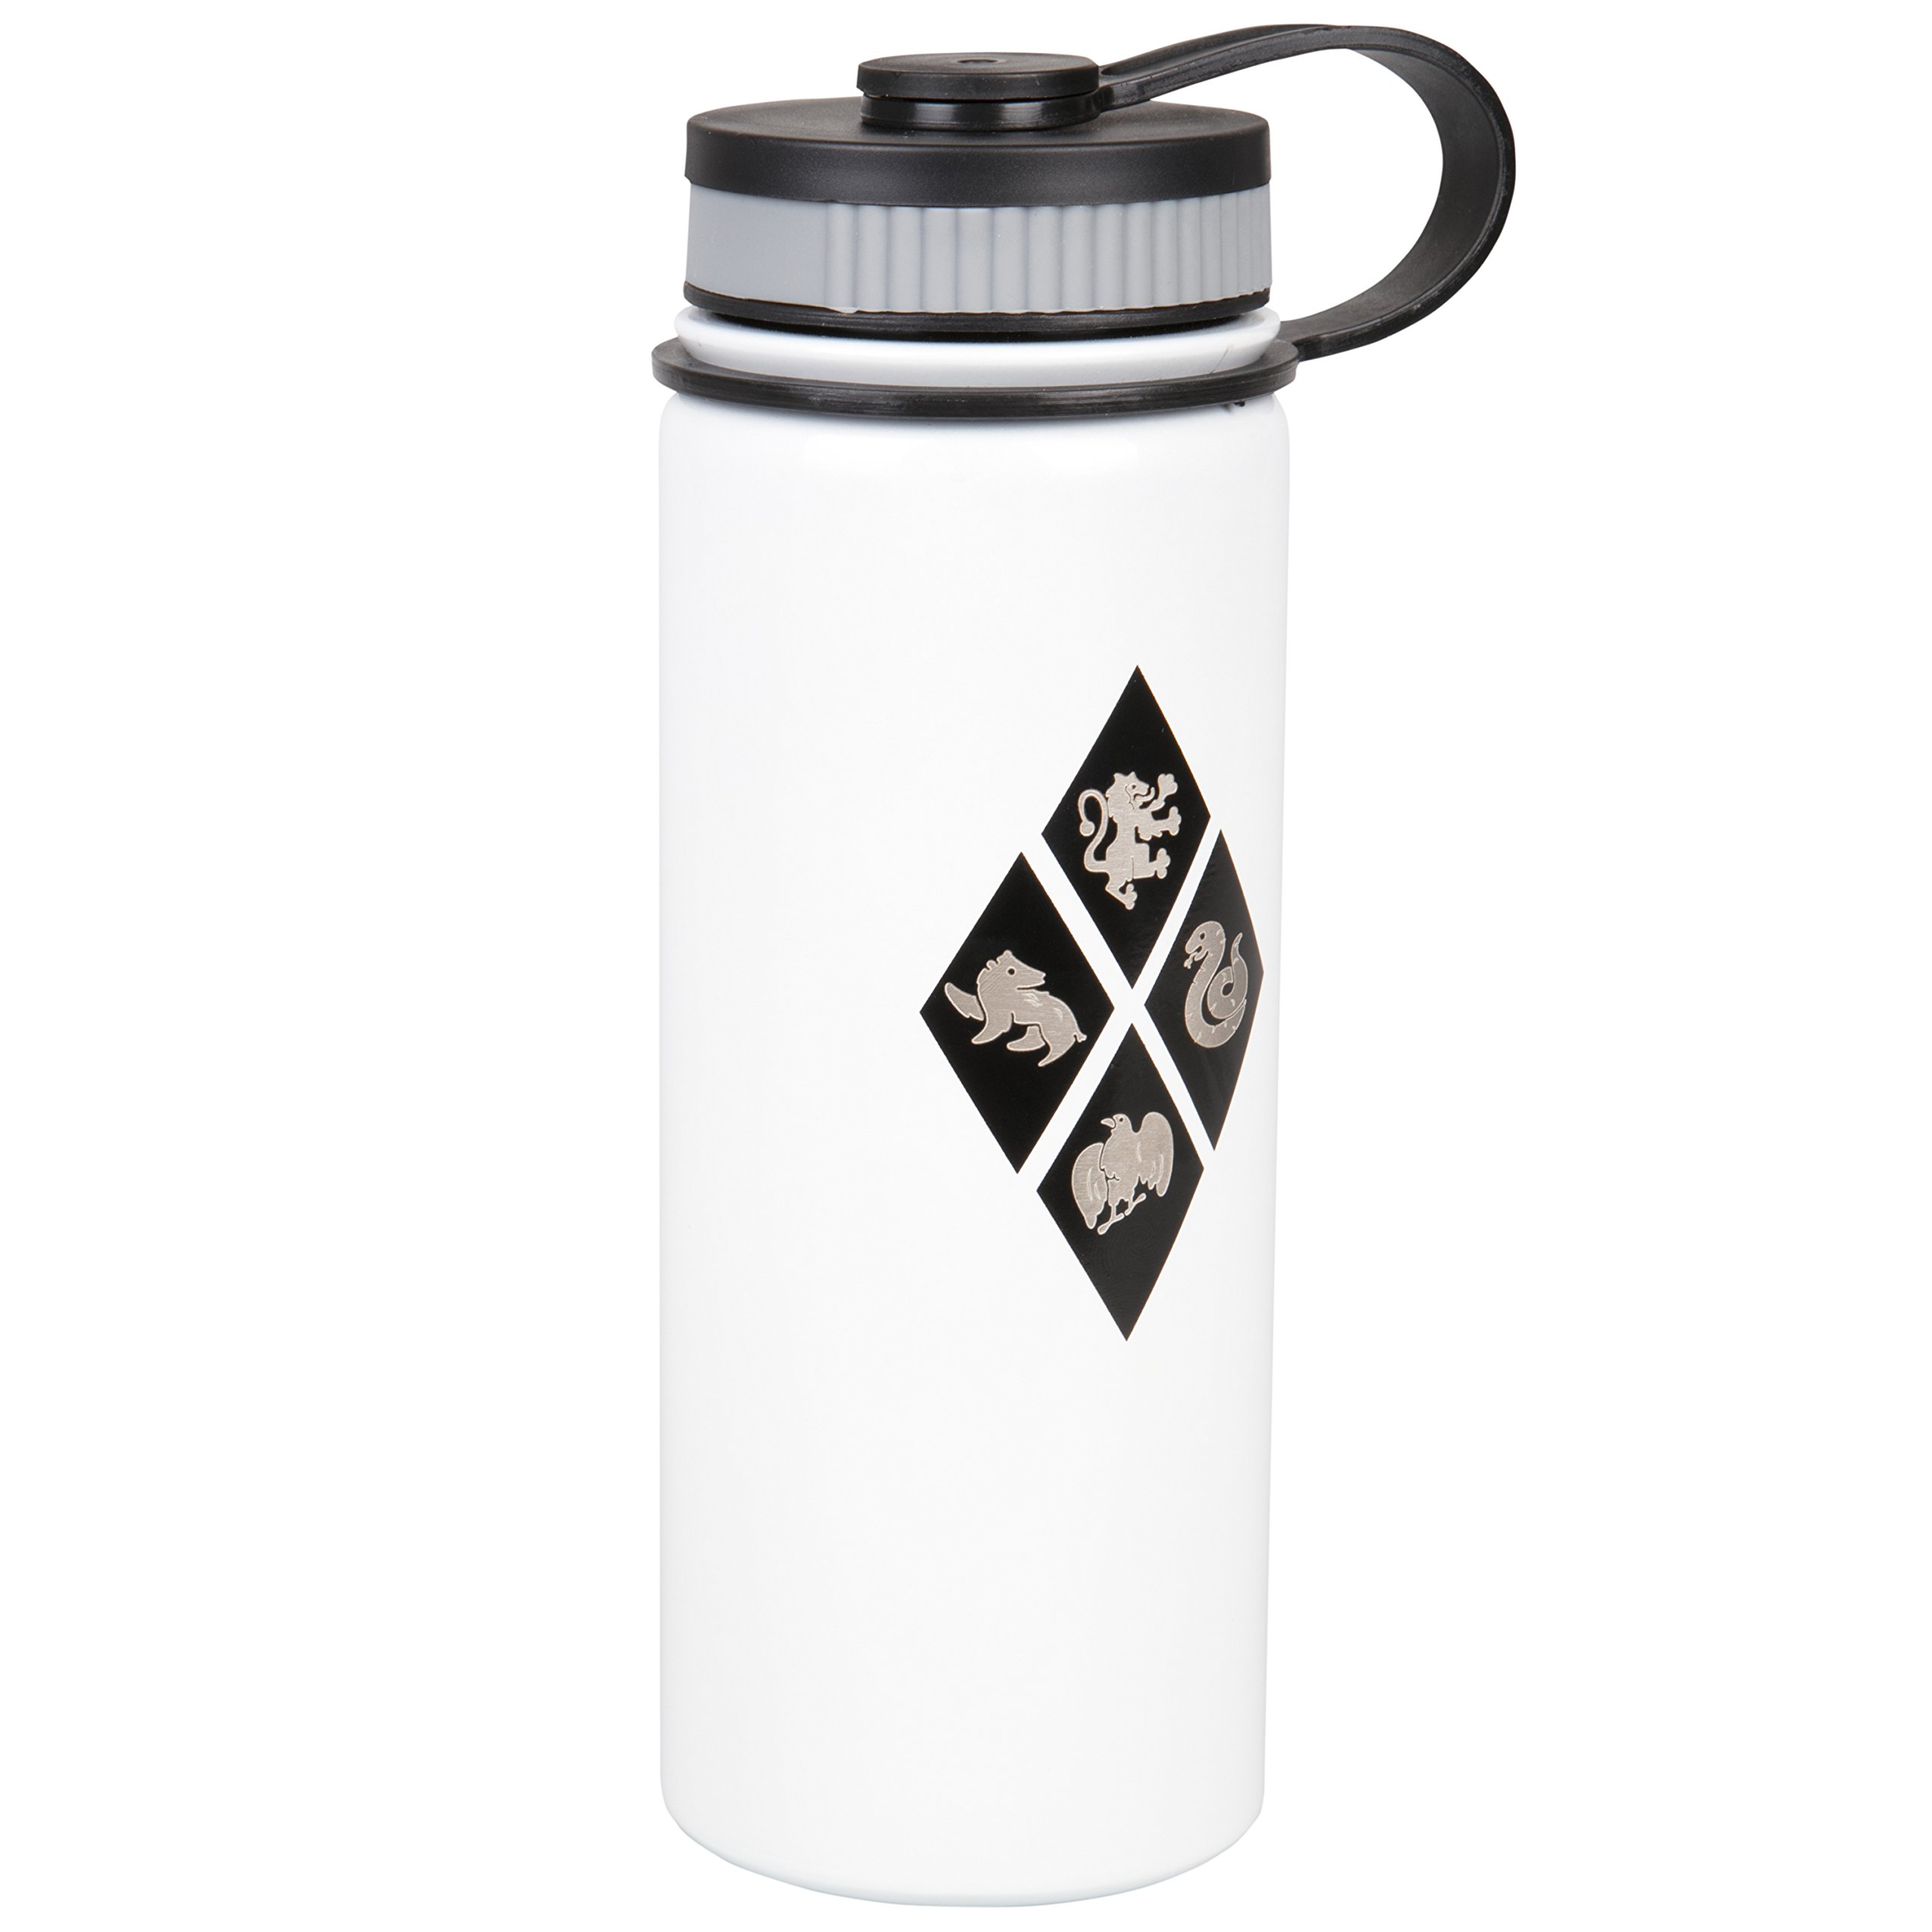 Harry Potter Stainless Steel Water Bottle Thermos, 550ml - Insulated for Water, Coffee & More - Hogwarts House Crest Design - Gift for Kids & Adults